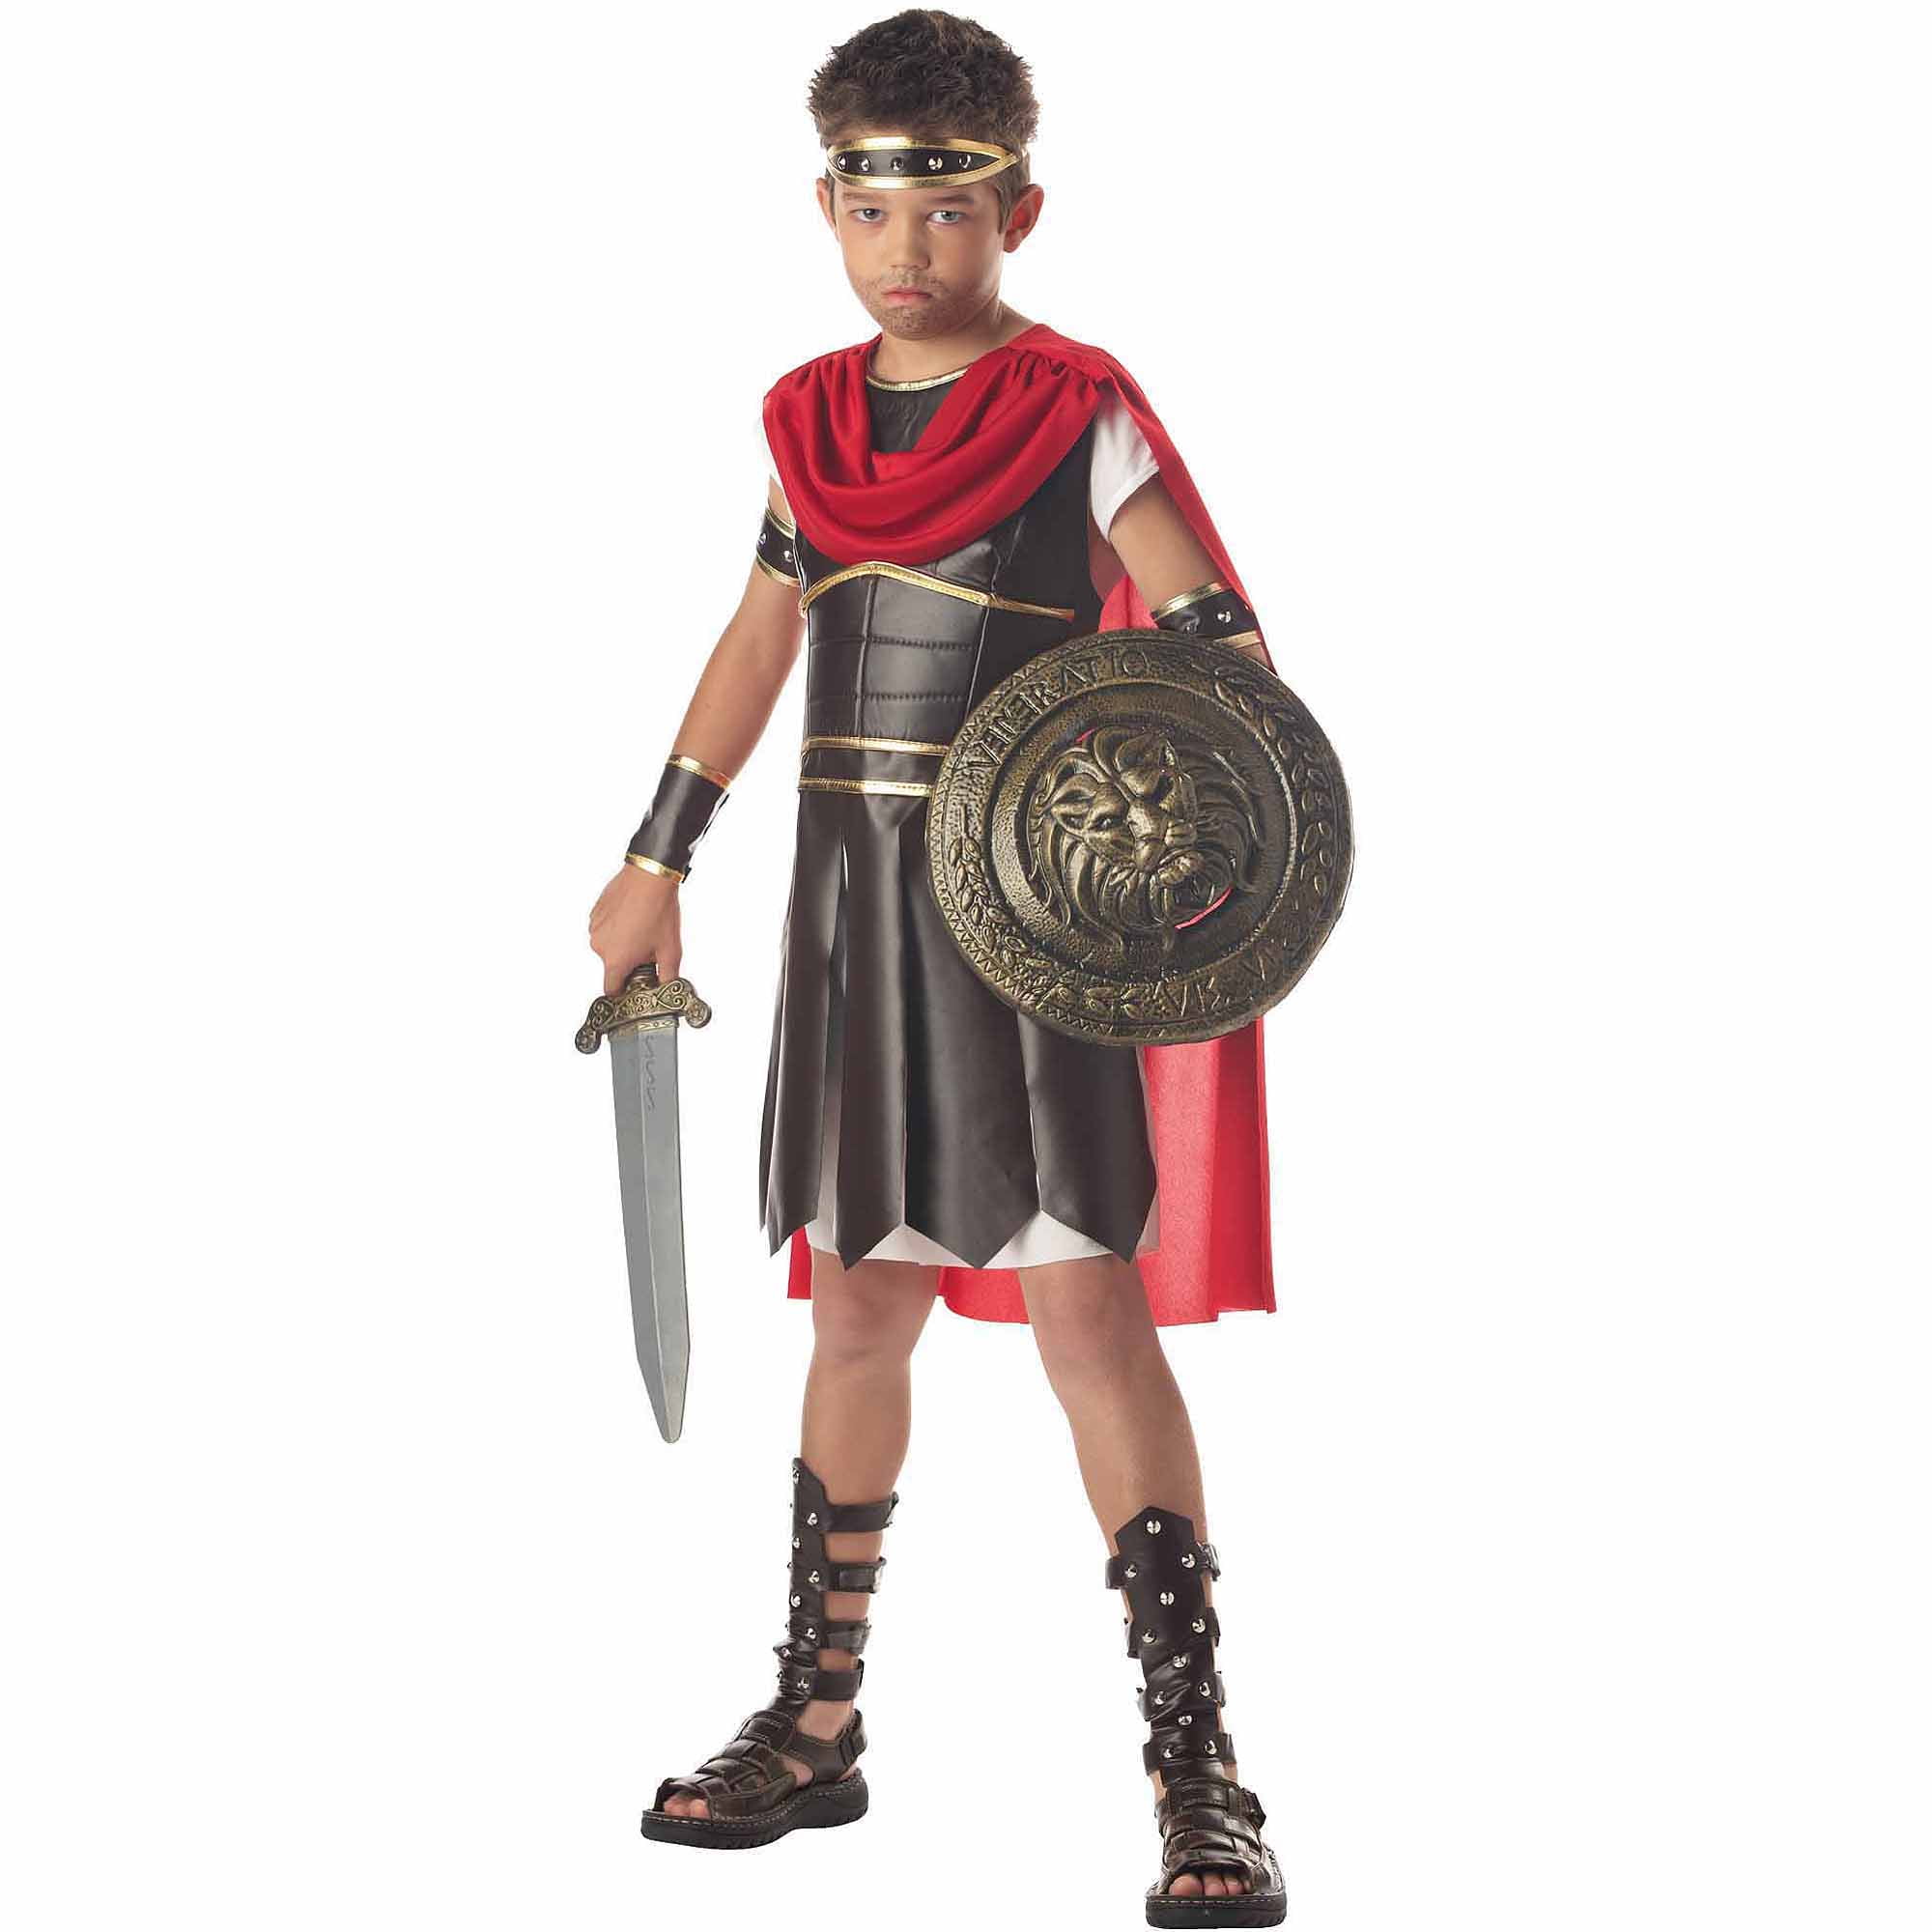 Details about  / Incharacter Infant Baby Gladiator Costume 12-18 Month New In Package